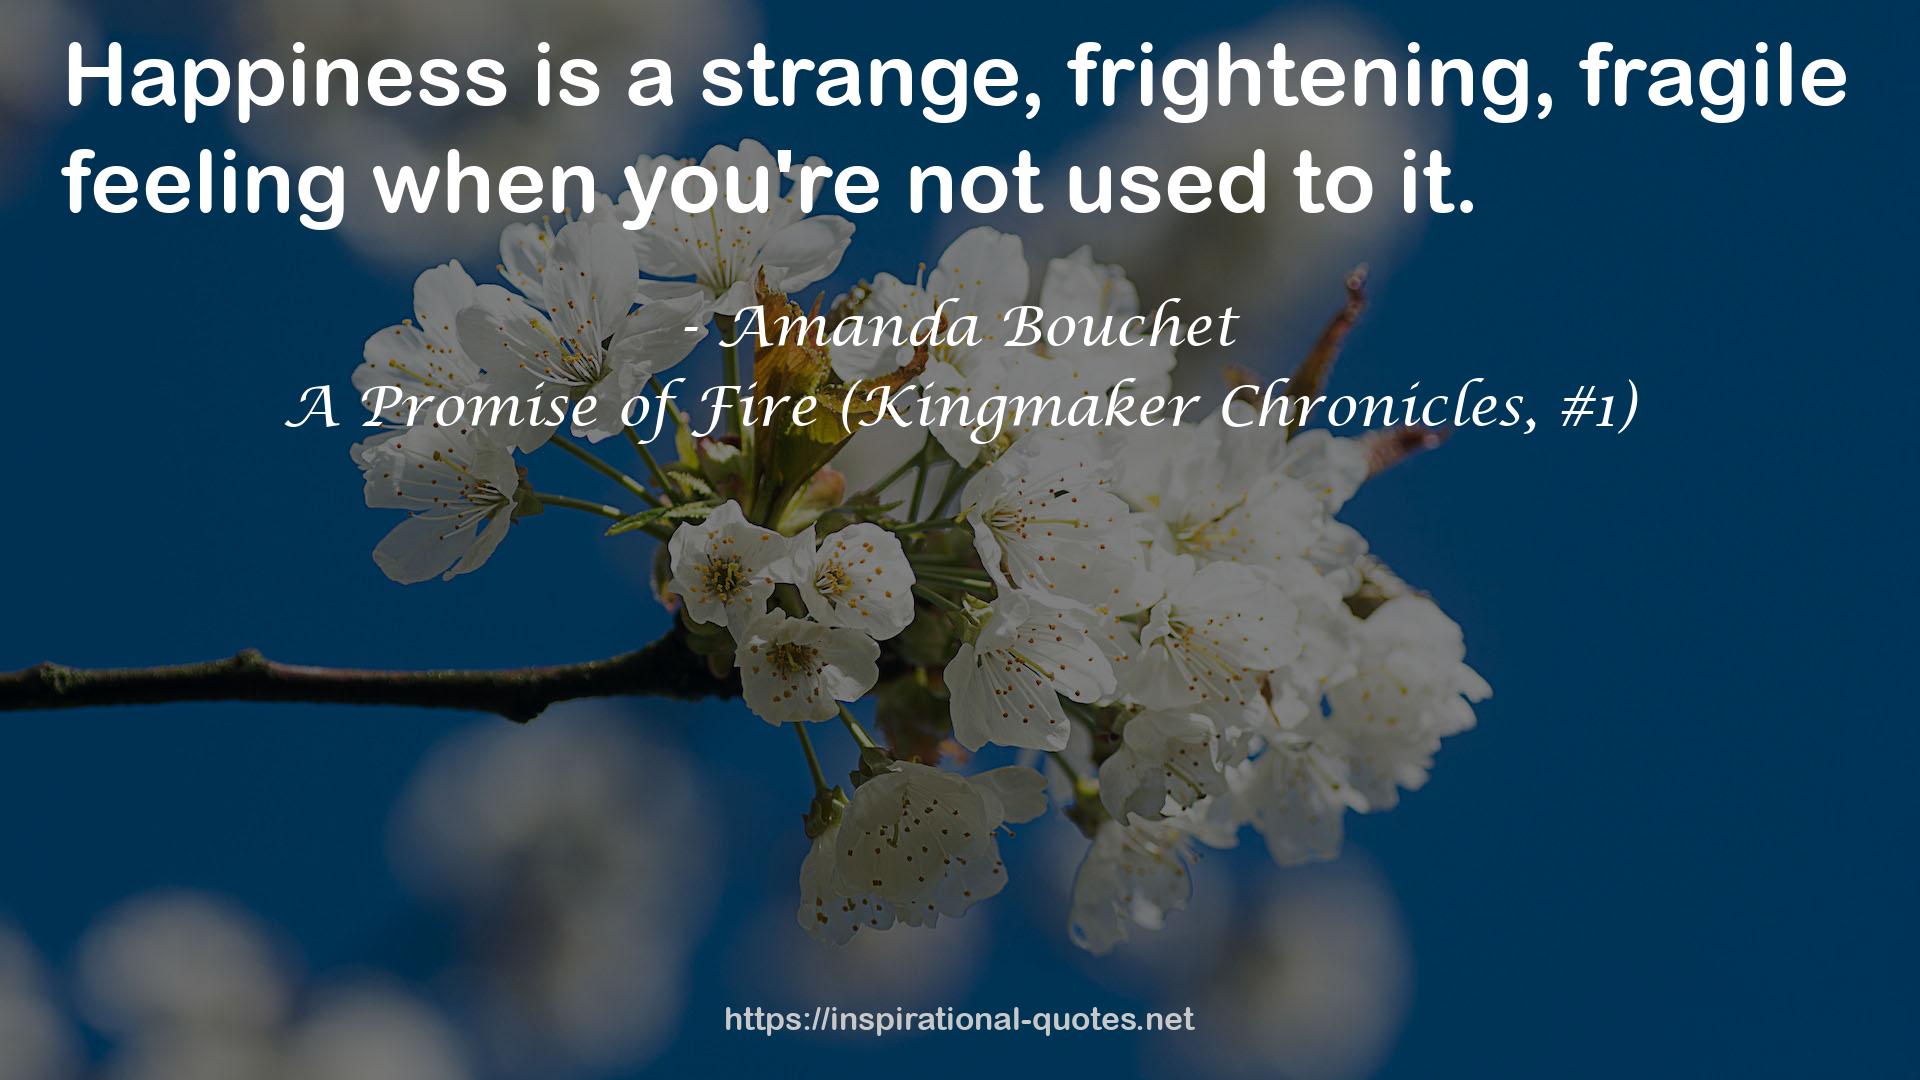 A Promise of Fire (Kingmaker Chronicles, #1) QUOTES